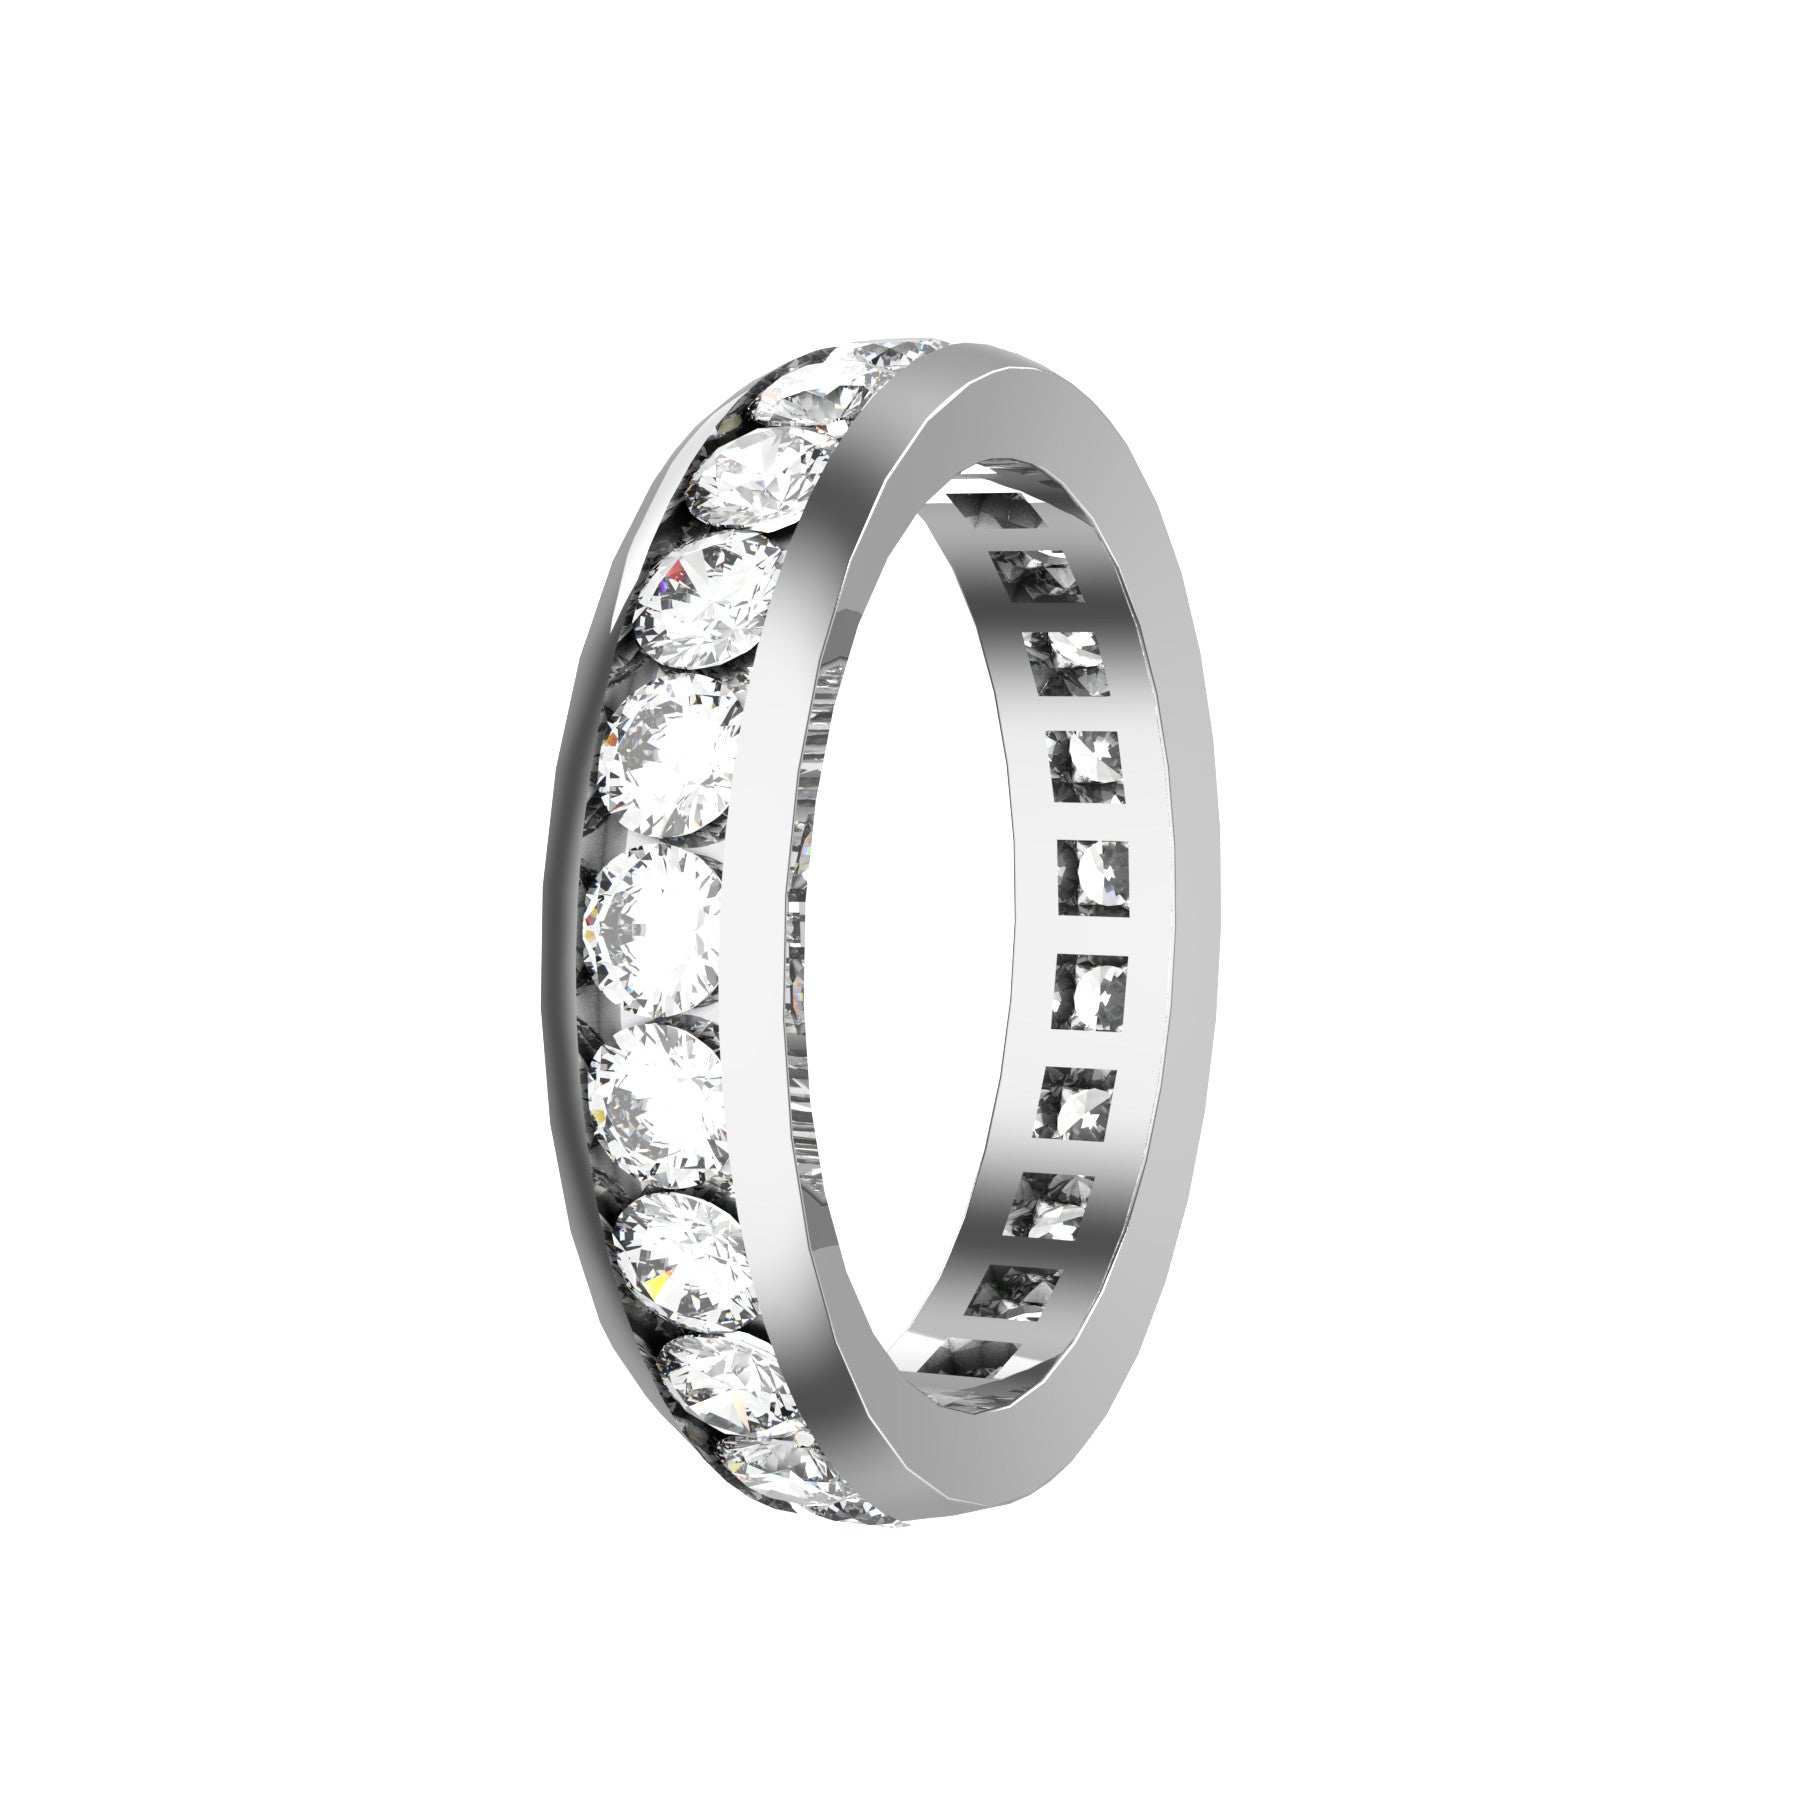 everlasting wedding band, 18 k white gold, 0,07 ct round natural diamonds, weight about 3,90 g. (0,14 oz), width 4,20 mm